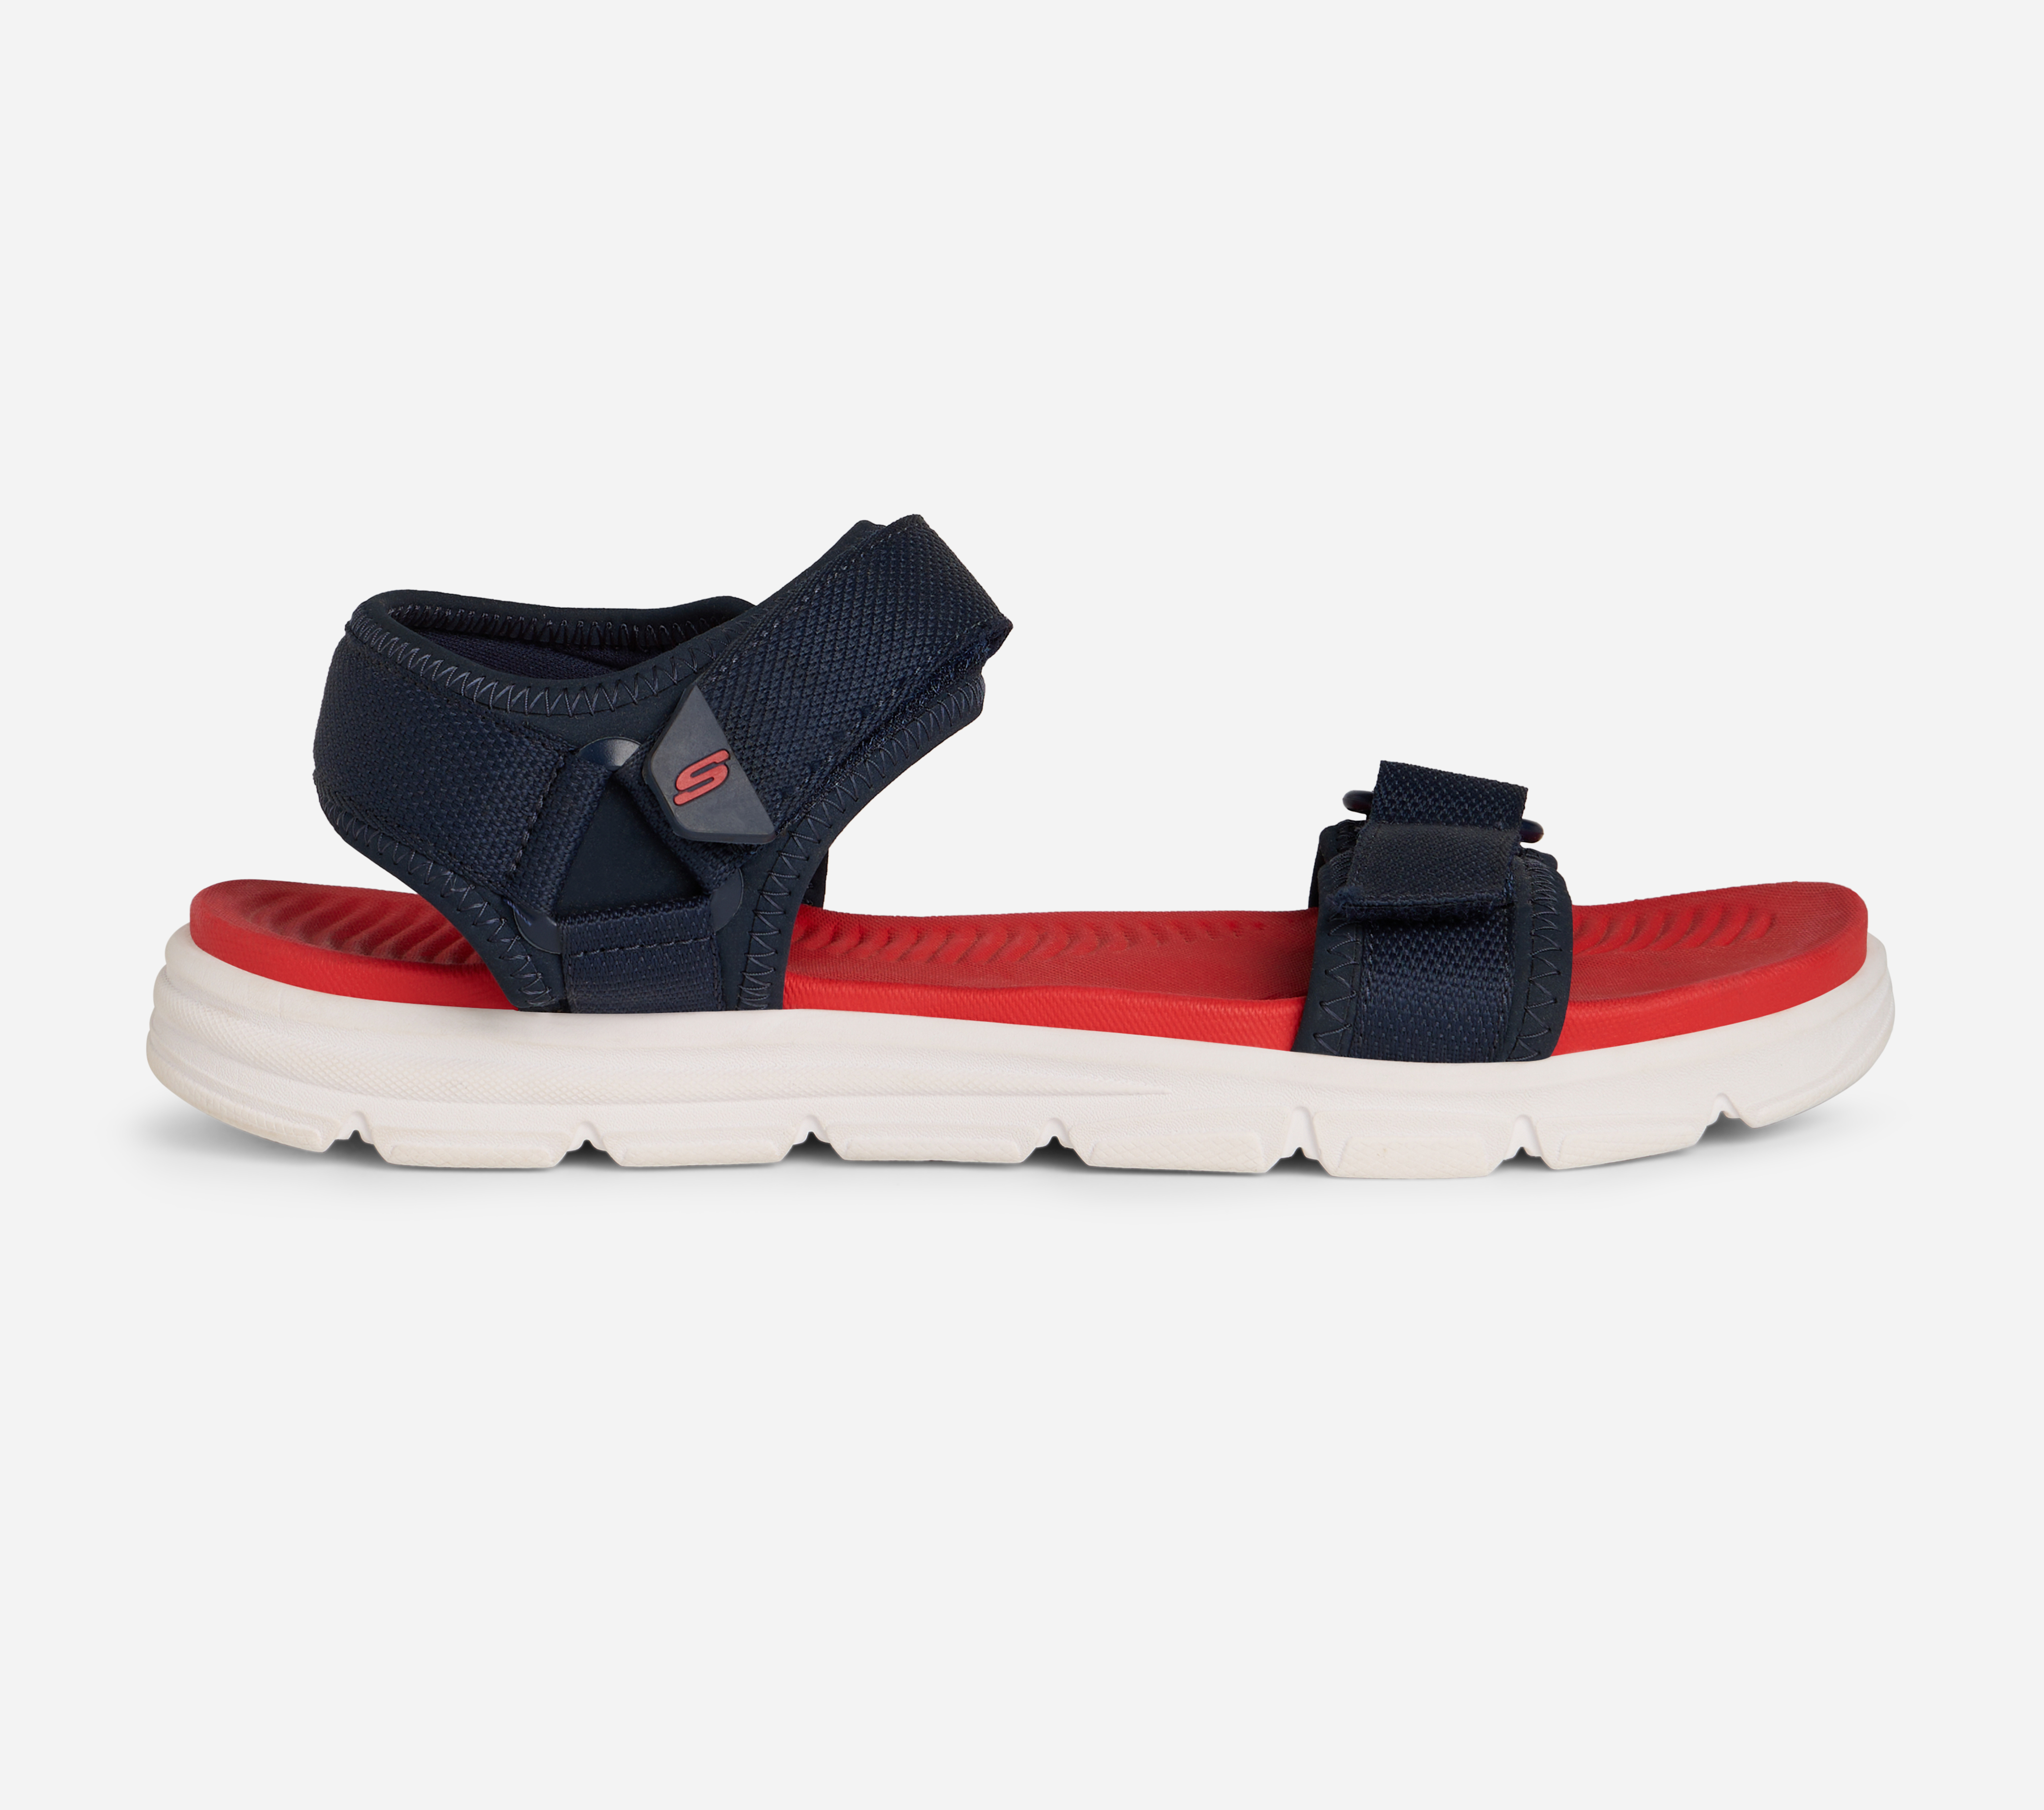 WIND SWELL - SWELL SWIFT, NAVY/RED Footwear Top View